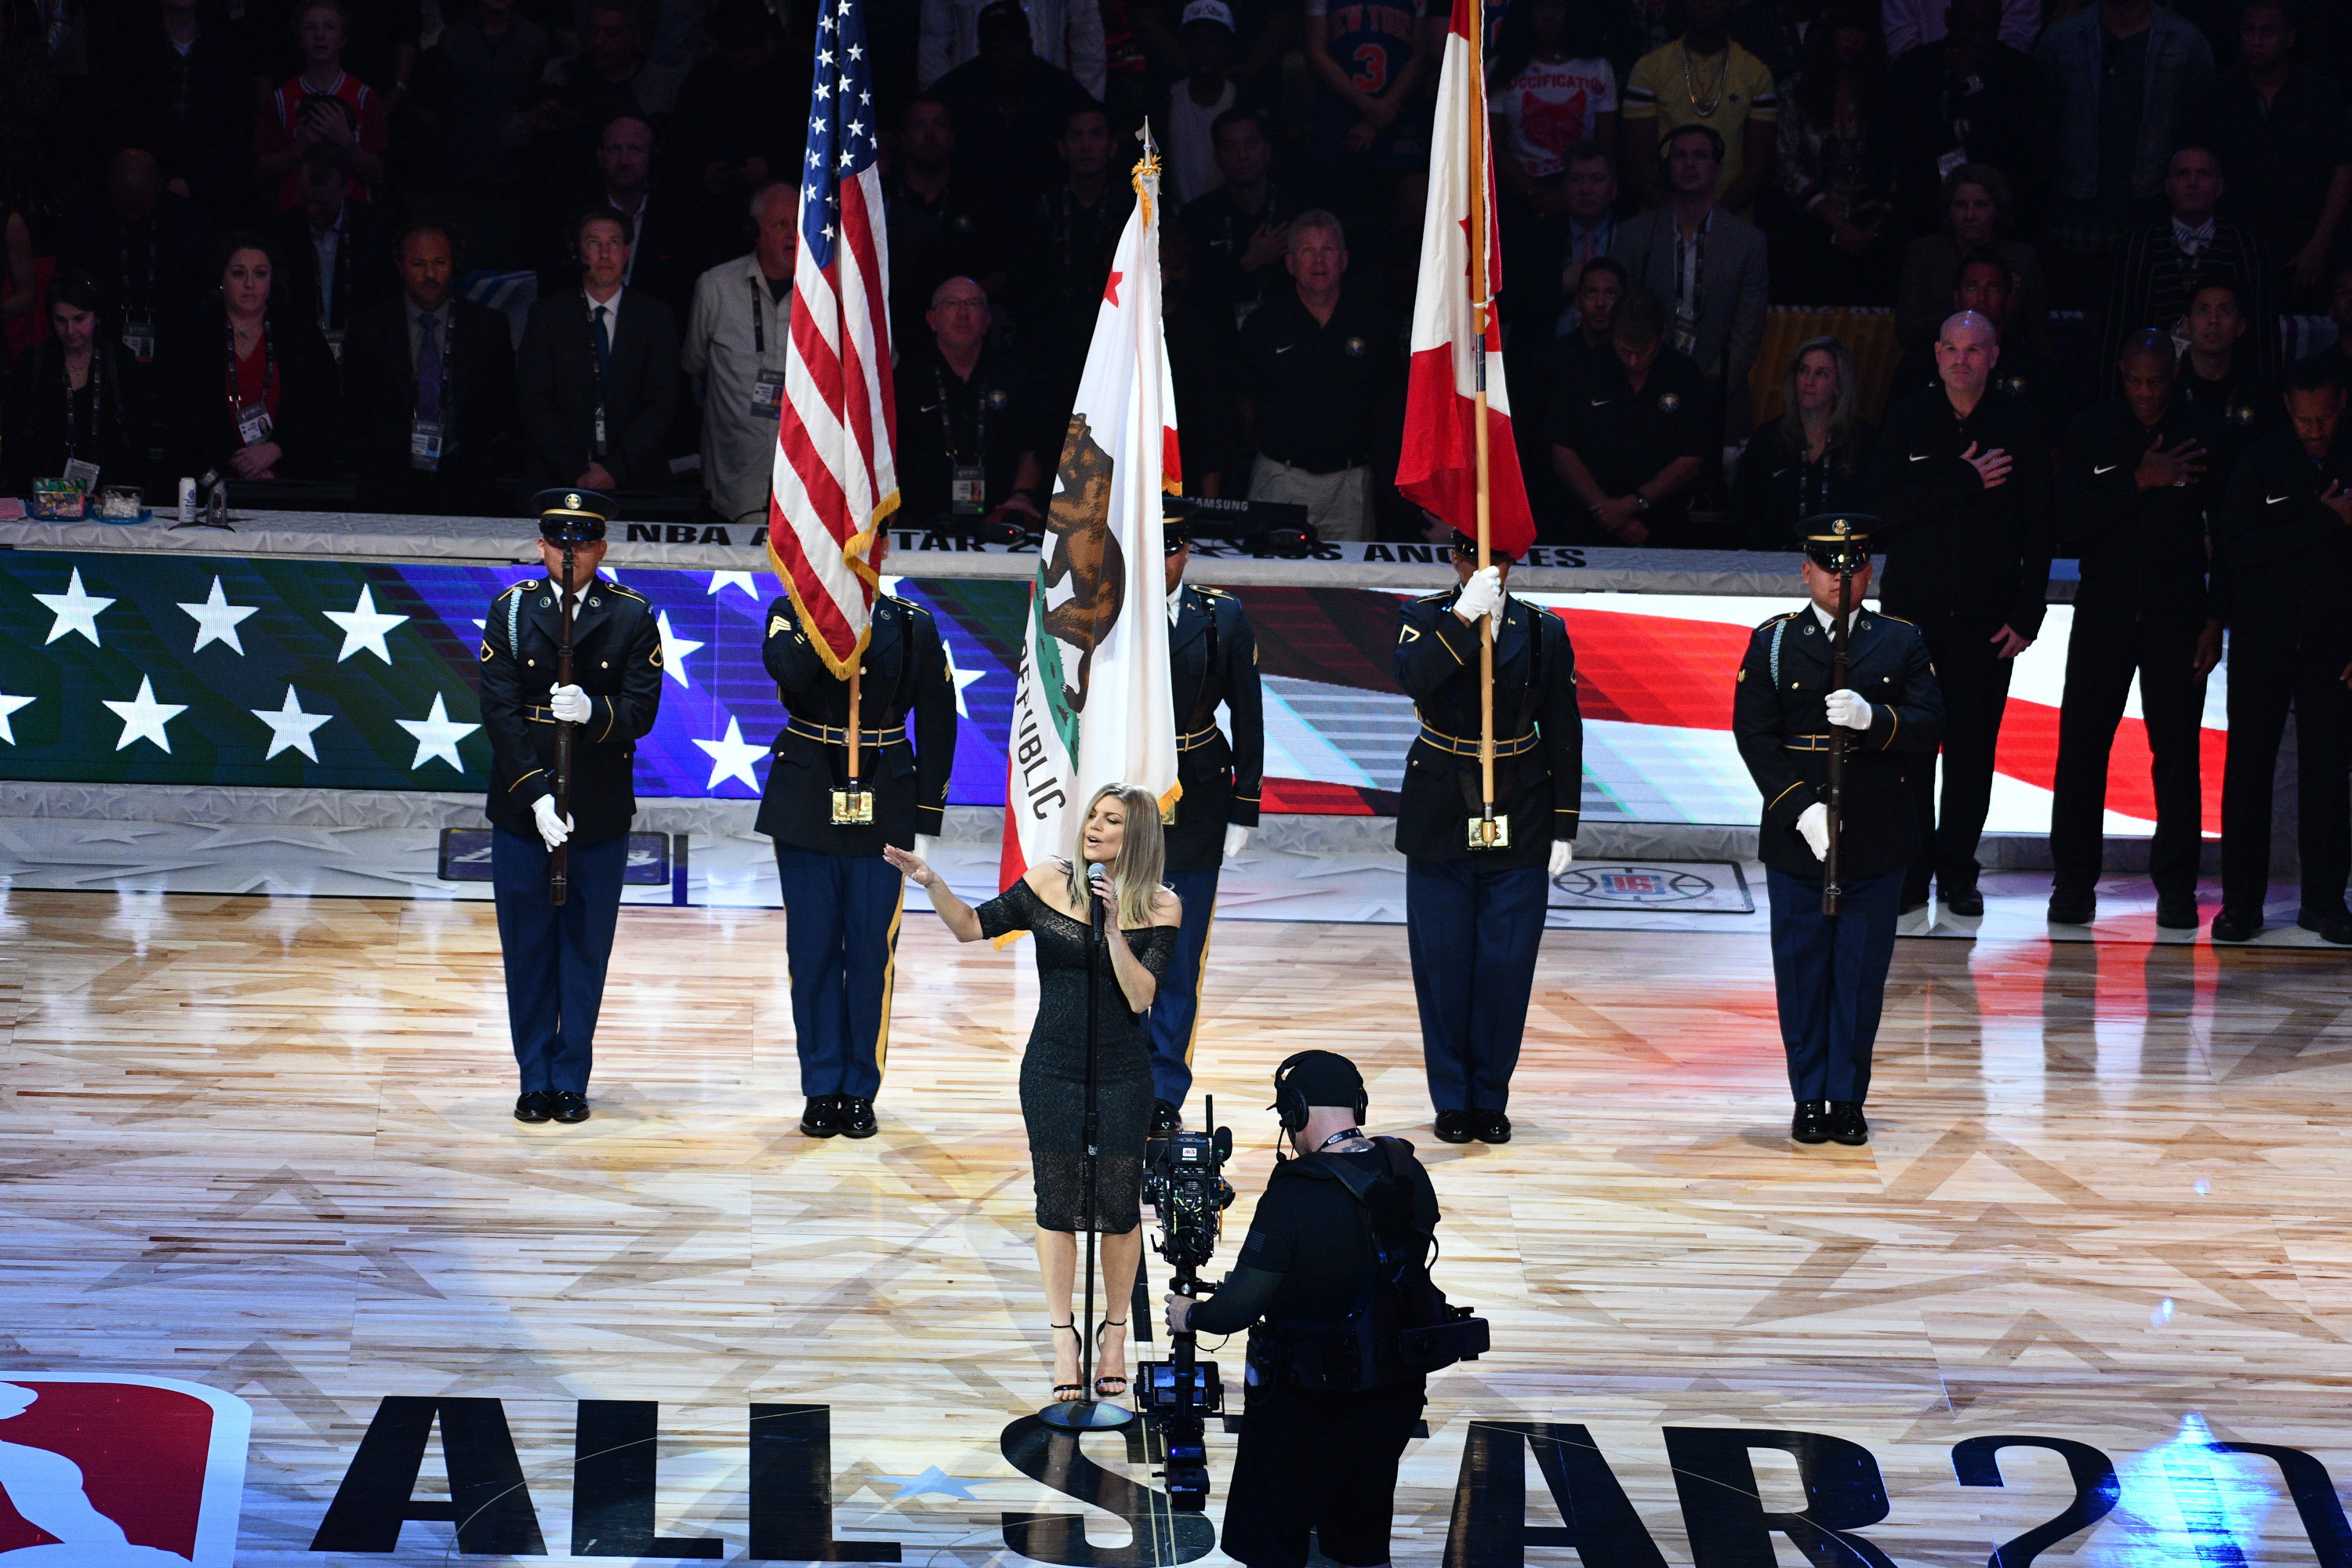 Watch Fergie's Bizarrely Awful National Anthem Performance at the NBA All-Star Game